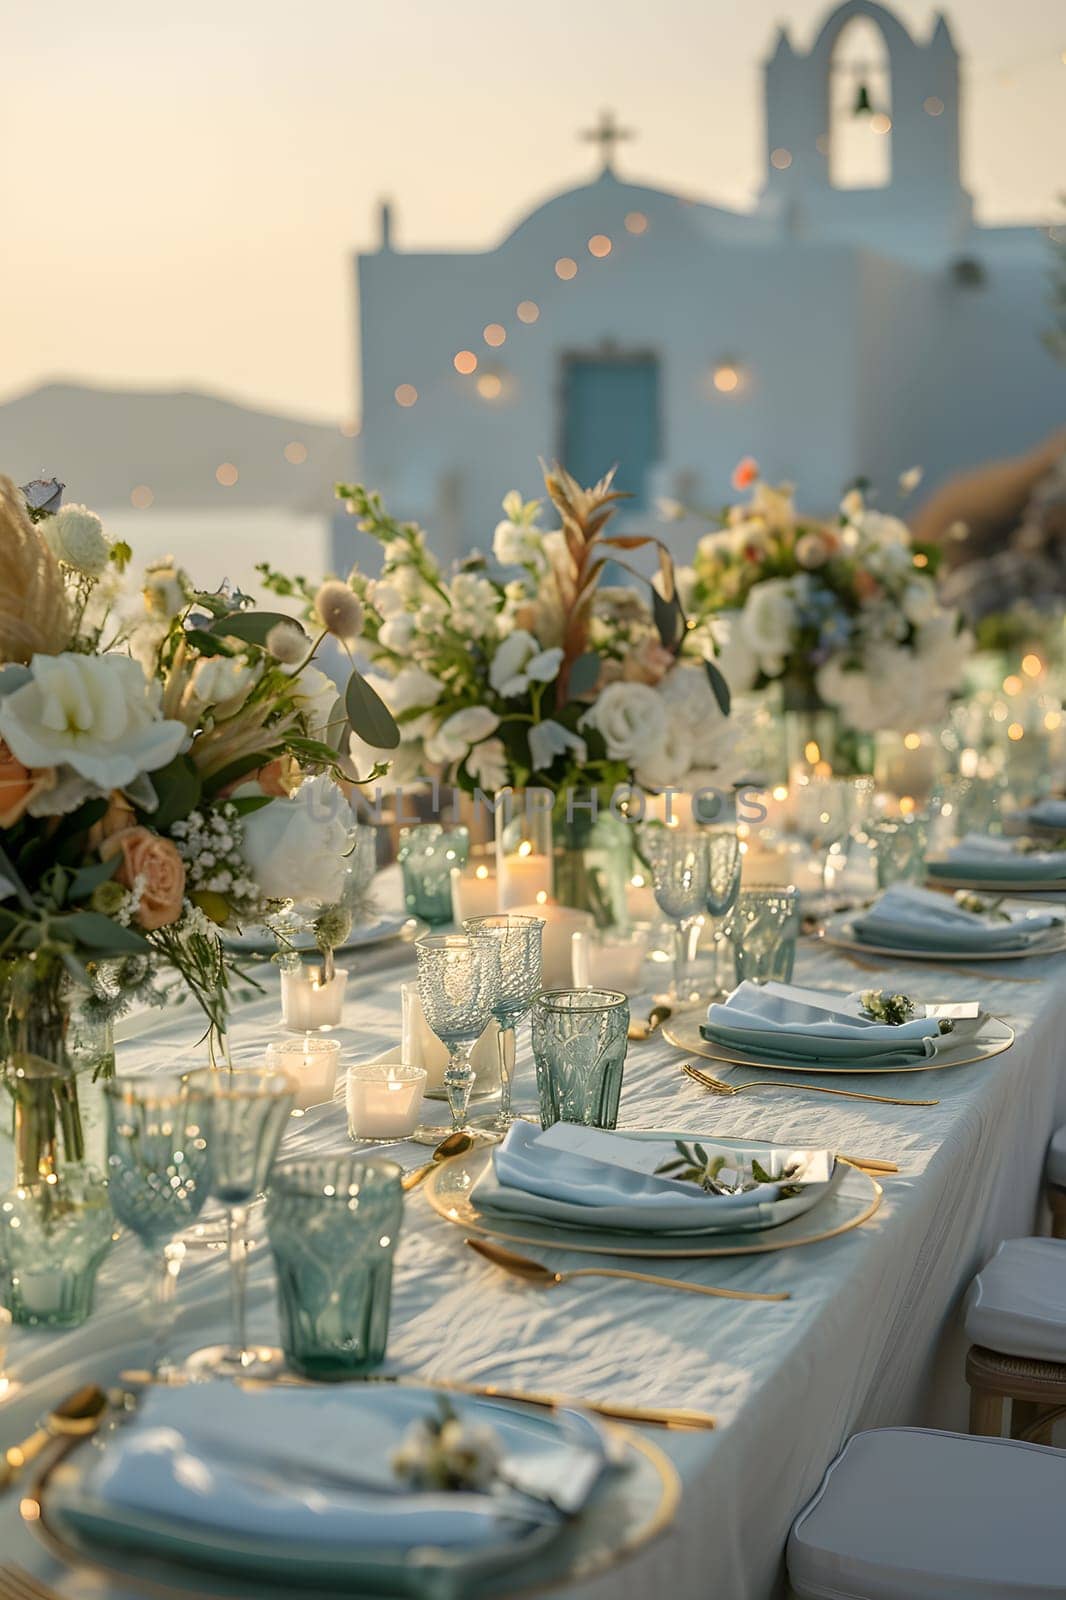 An elegant table setting for a wedding reception with beautiful tableware, plates, glasses, and vases of flowers under the open sky, overlooking a cityscape